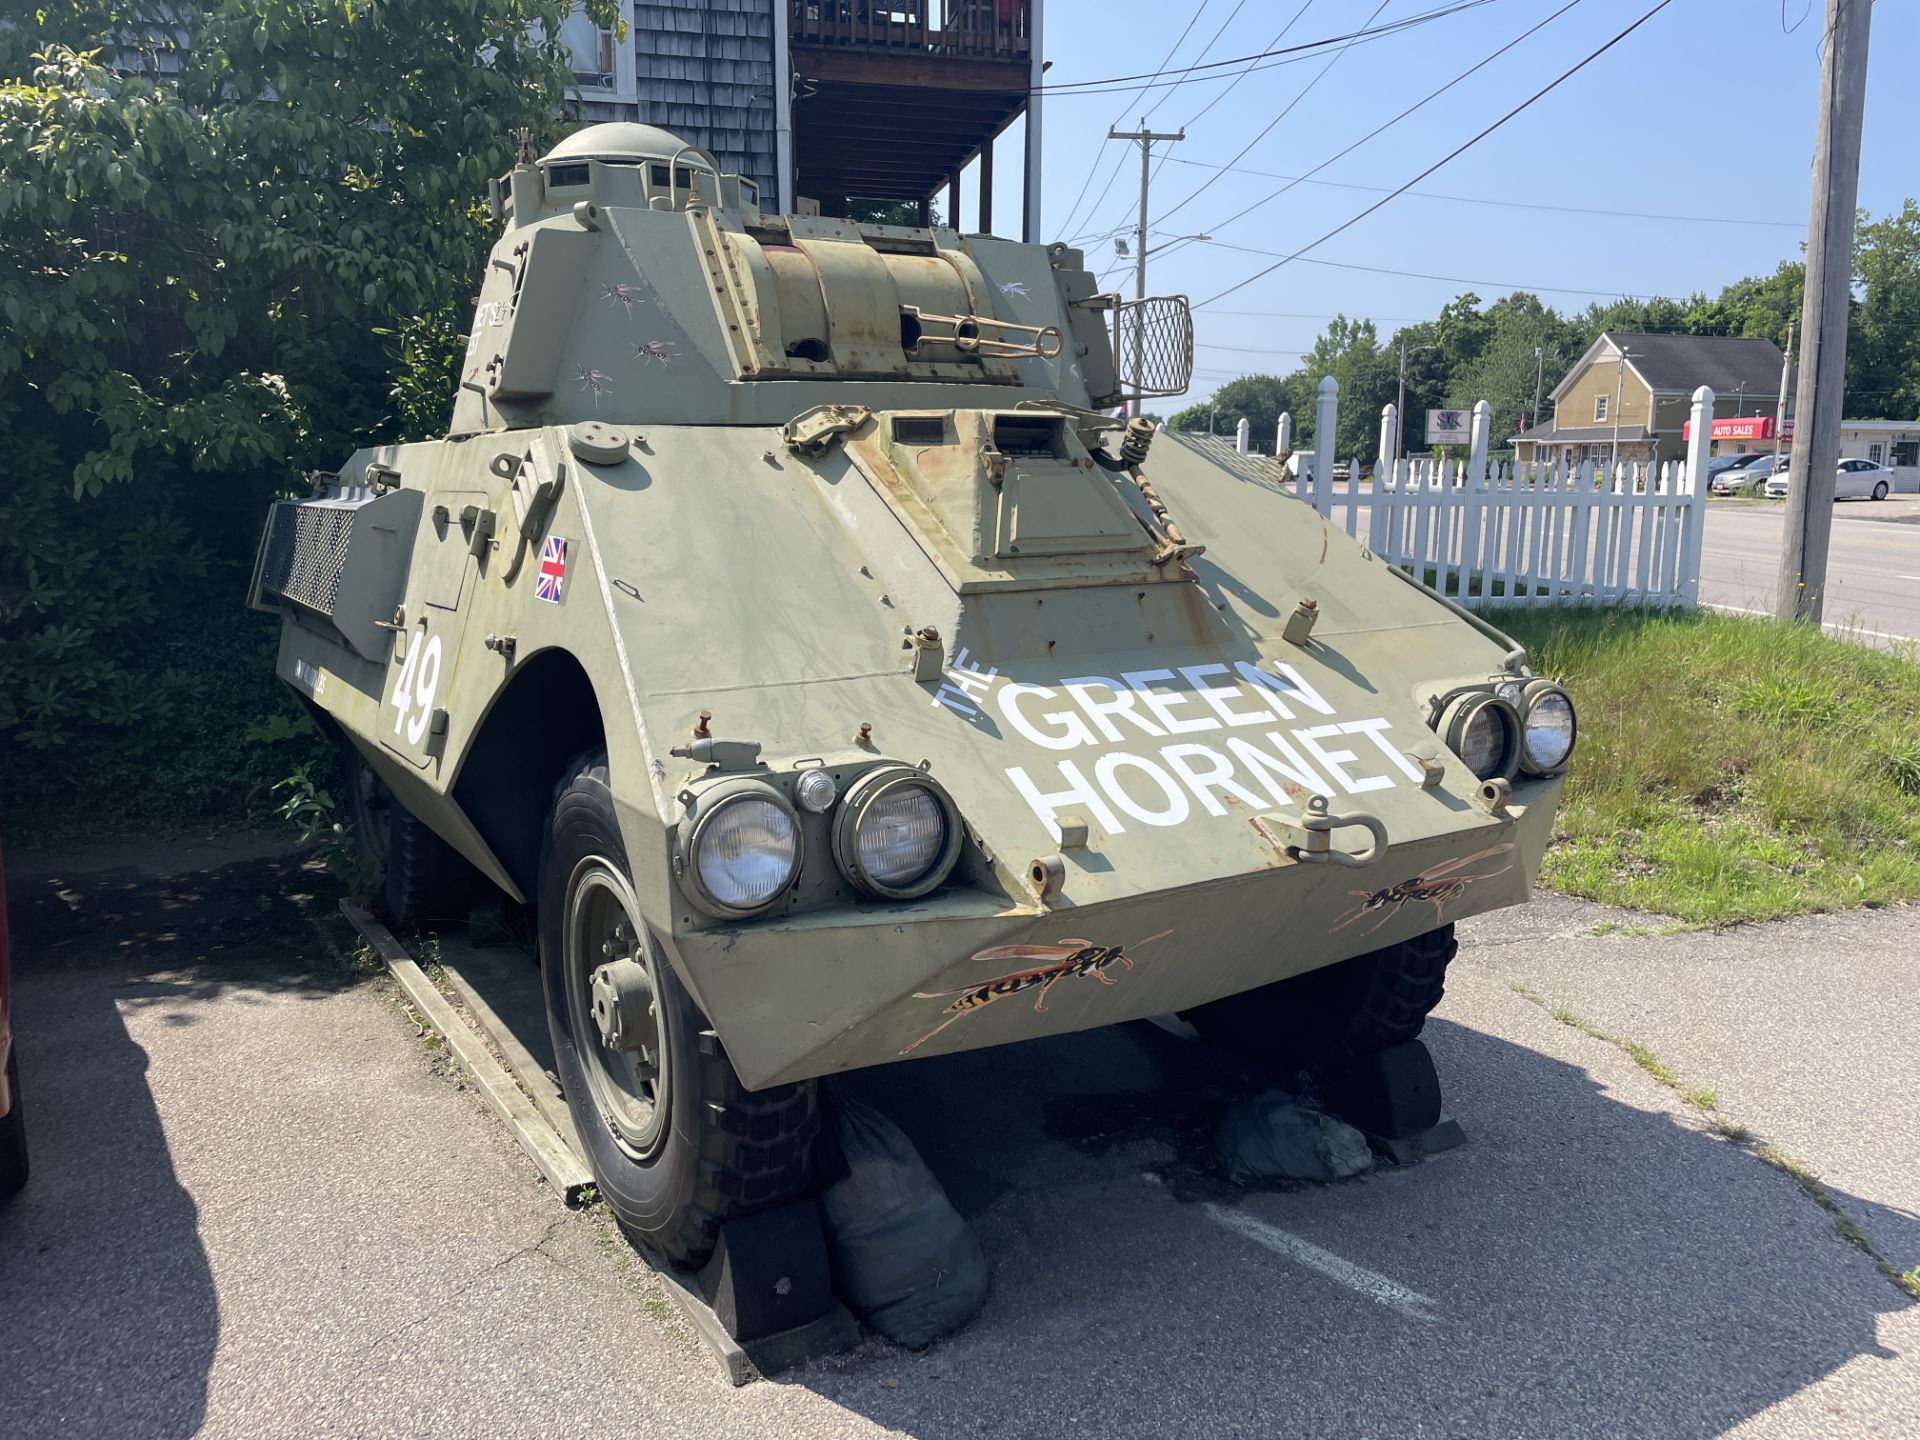 FN 4 RM 62F Armored Car As Seen in the film "Dogs of War" - Has Ford 6 Cylinder Motor and